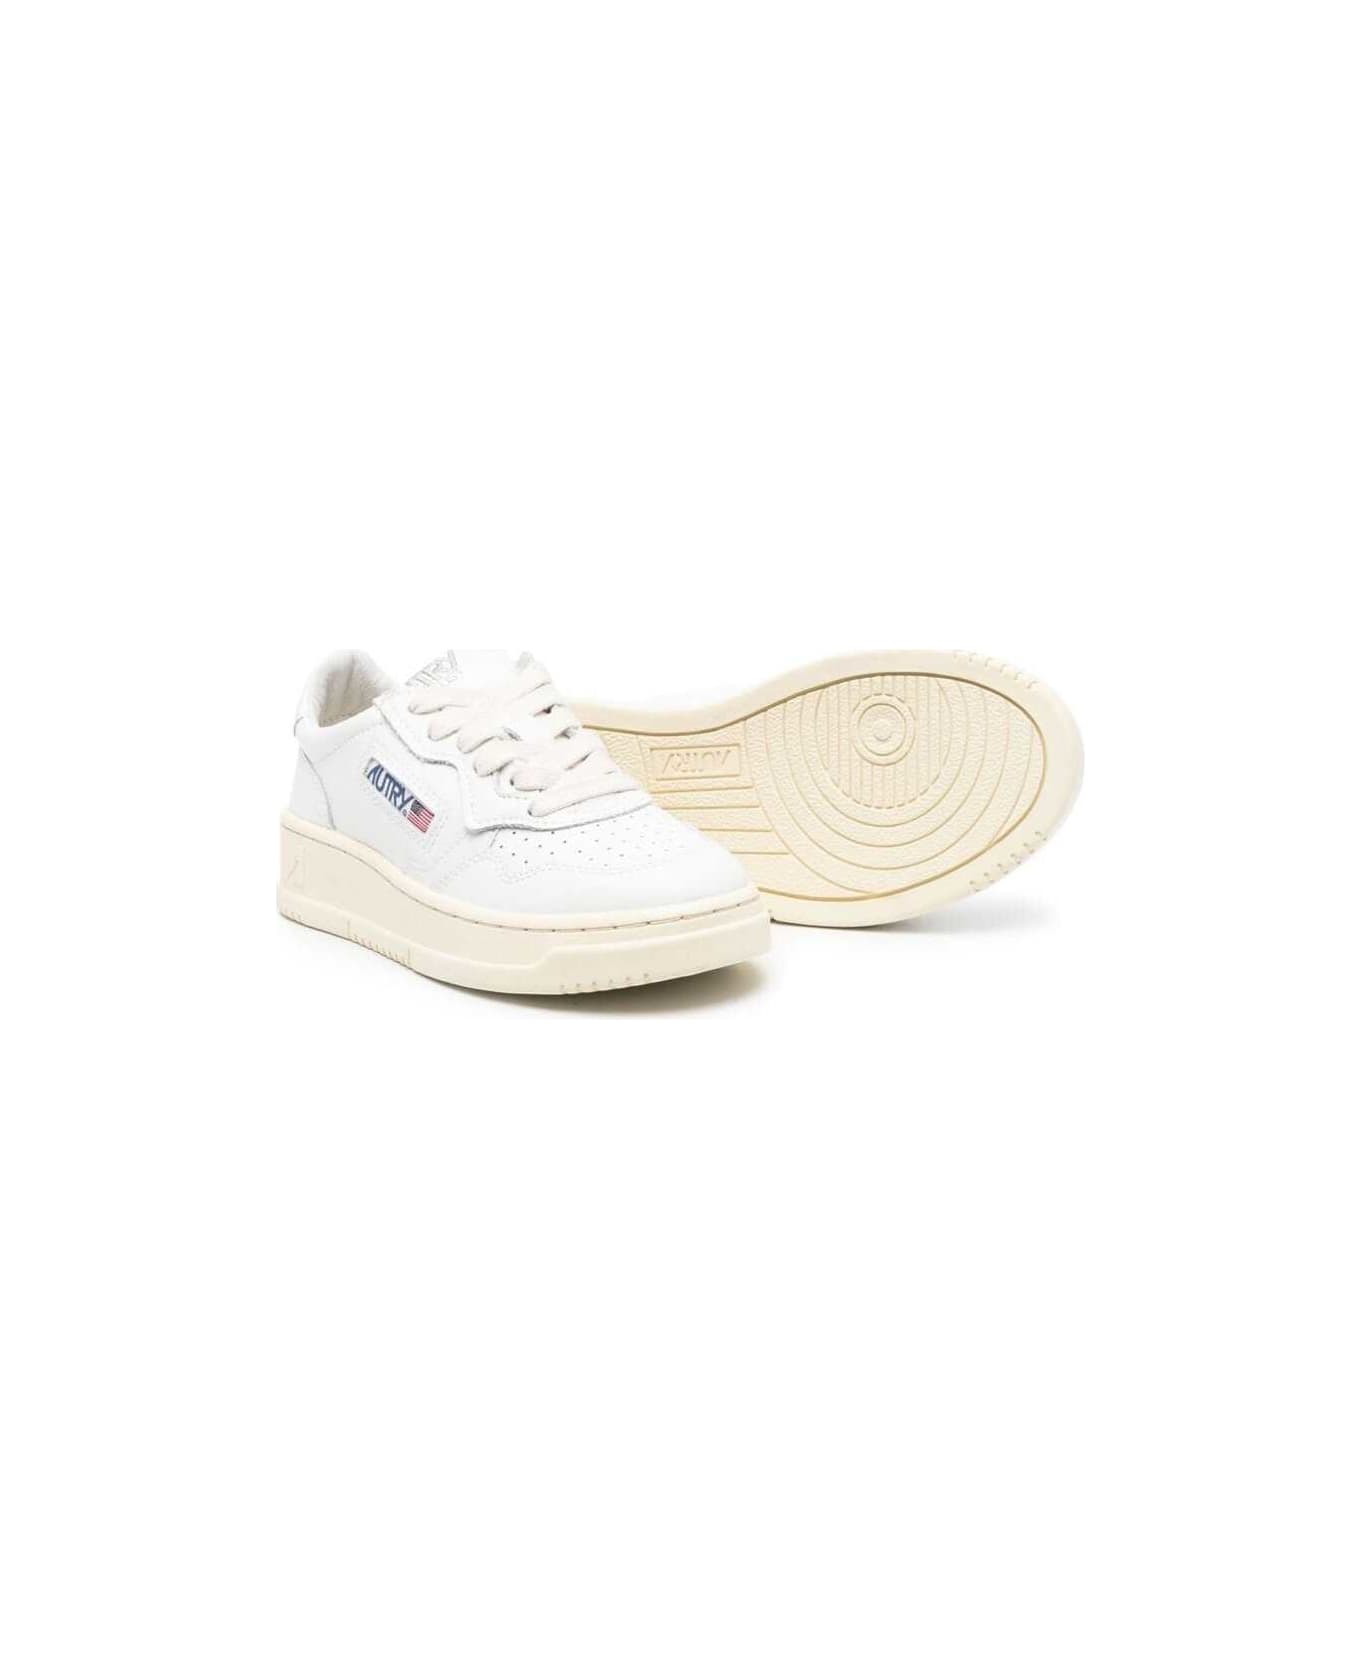 Autry White 'medalist' Low Top Sneakers In Cow Leather Boy - Wht/wht